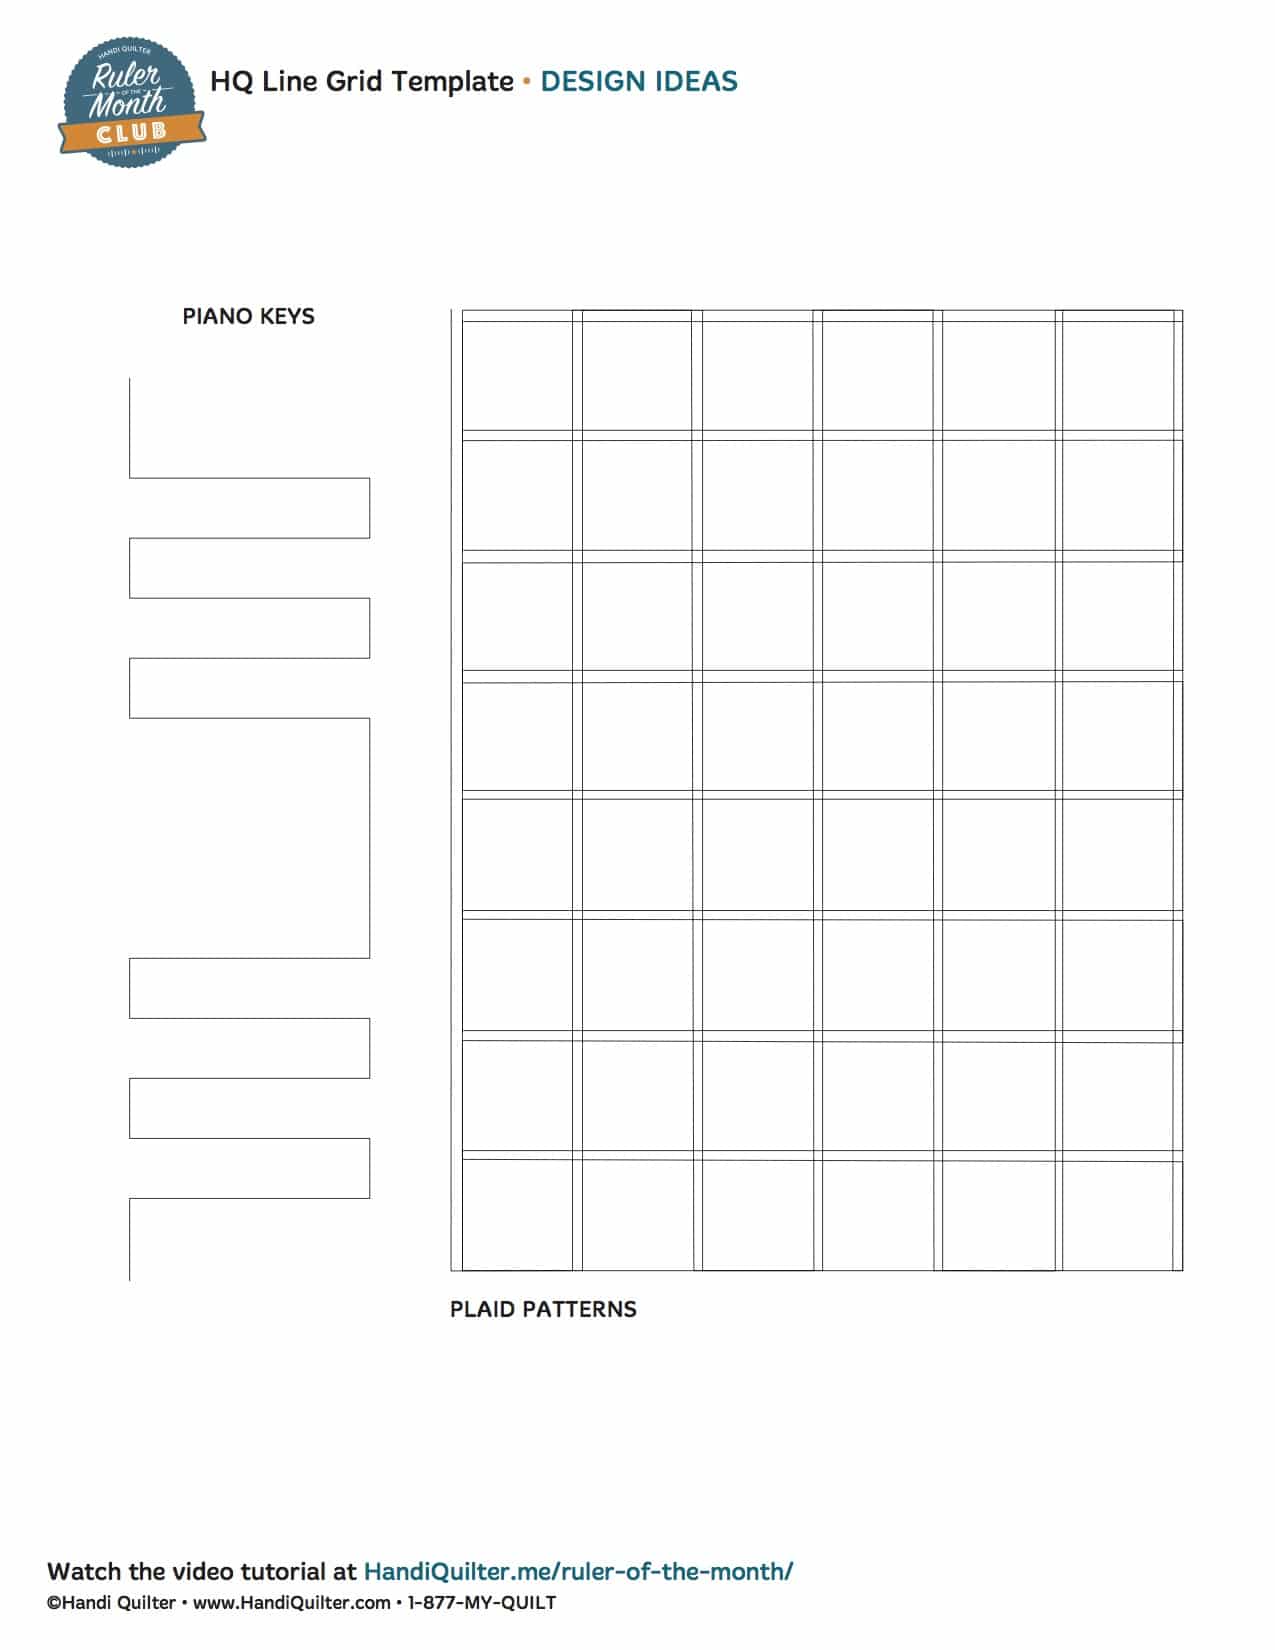 HQ-Monthly-Ruler-Club-LineGrid-Designs-2[1]